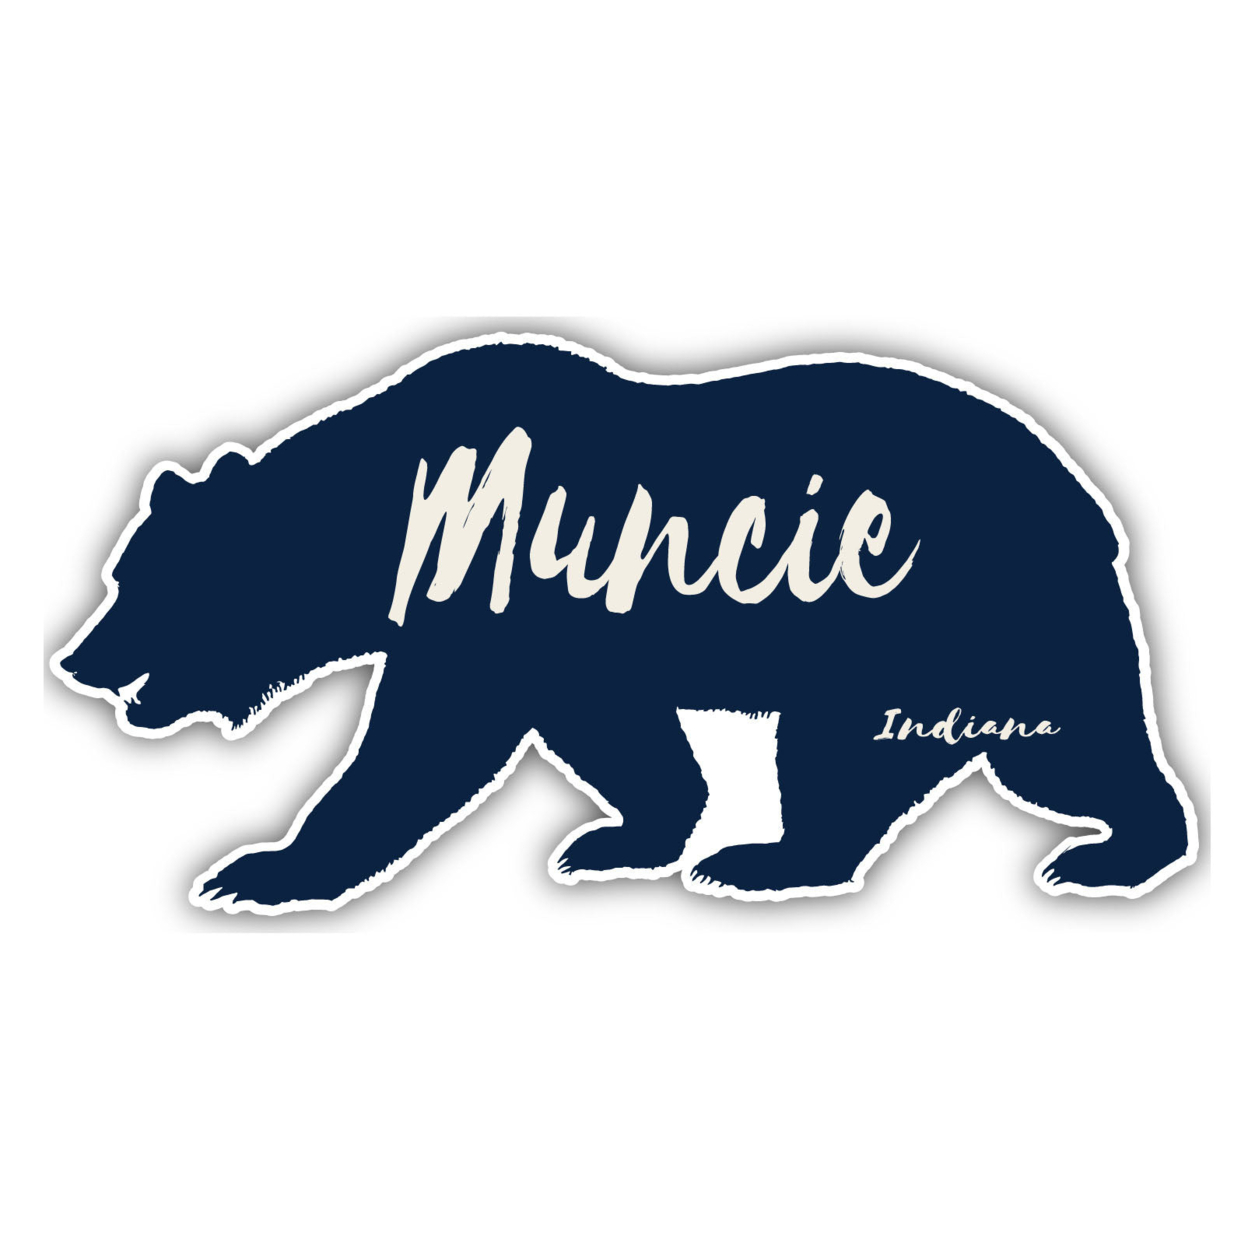 Muncie Indiana Souvenir Decorative Stickers (Choose Theme And Size) - Single Unit, 2-Inch, Great Outdoors